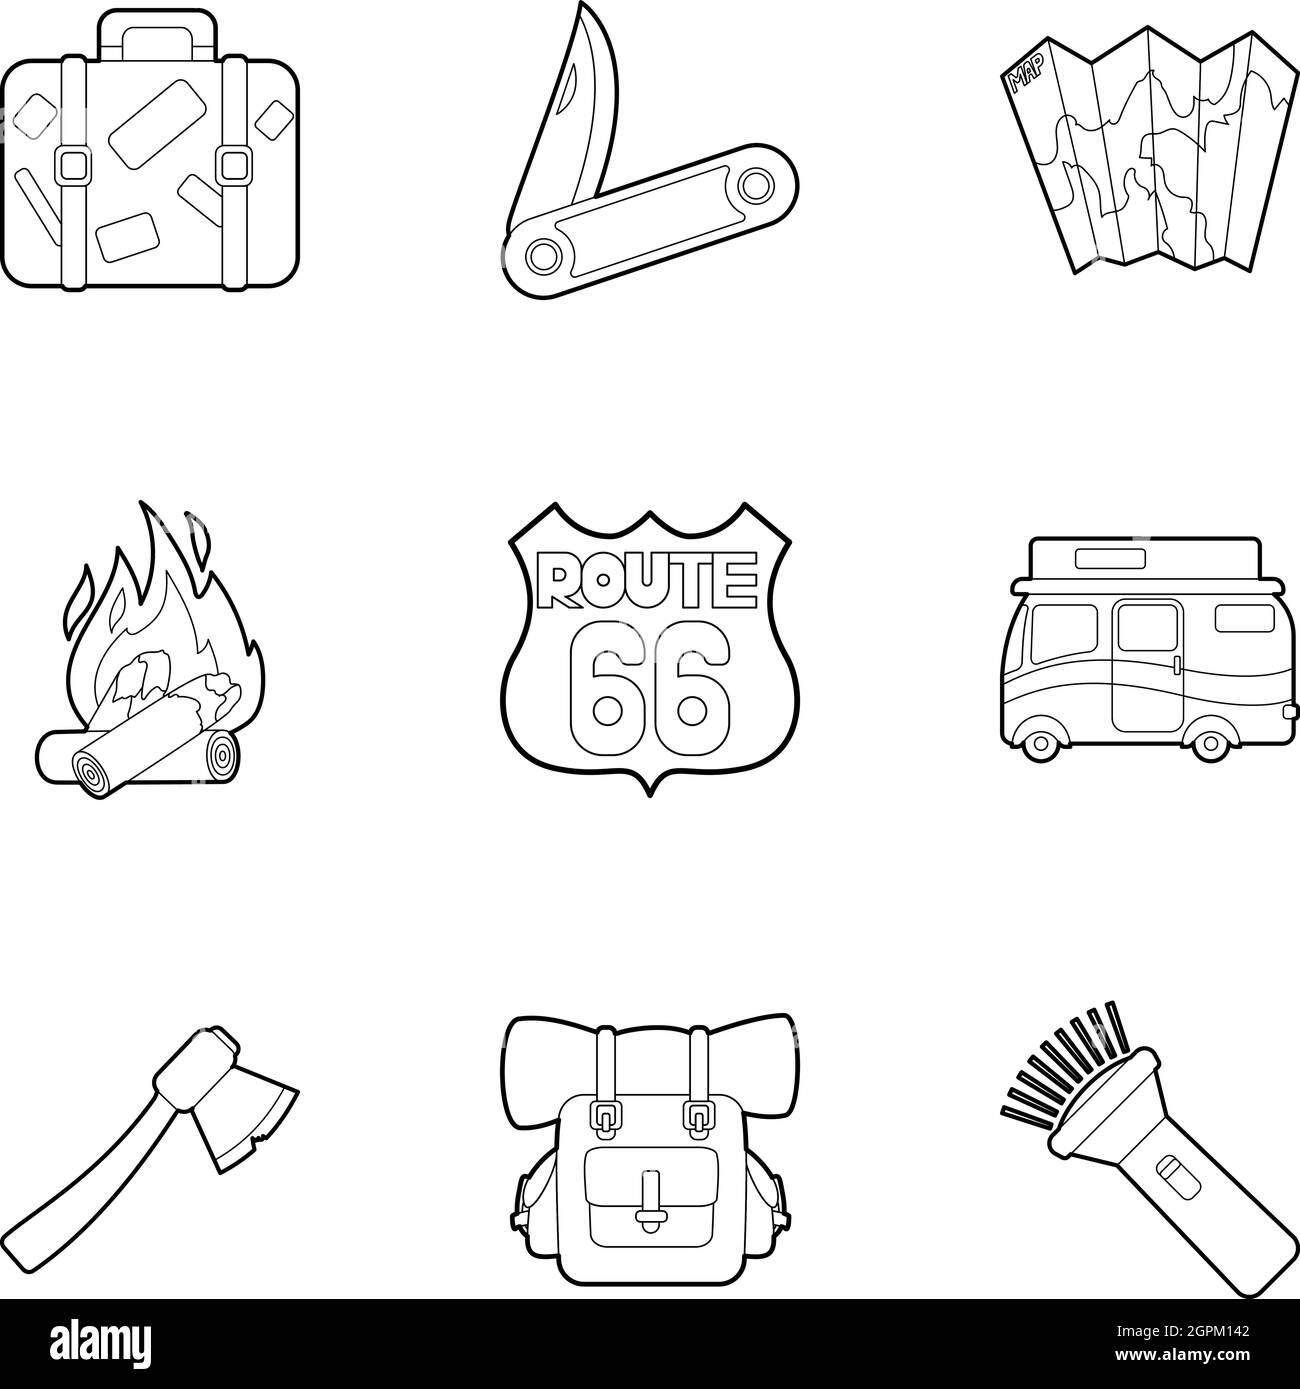 Rest on nature icons set, outline style Stock Vector